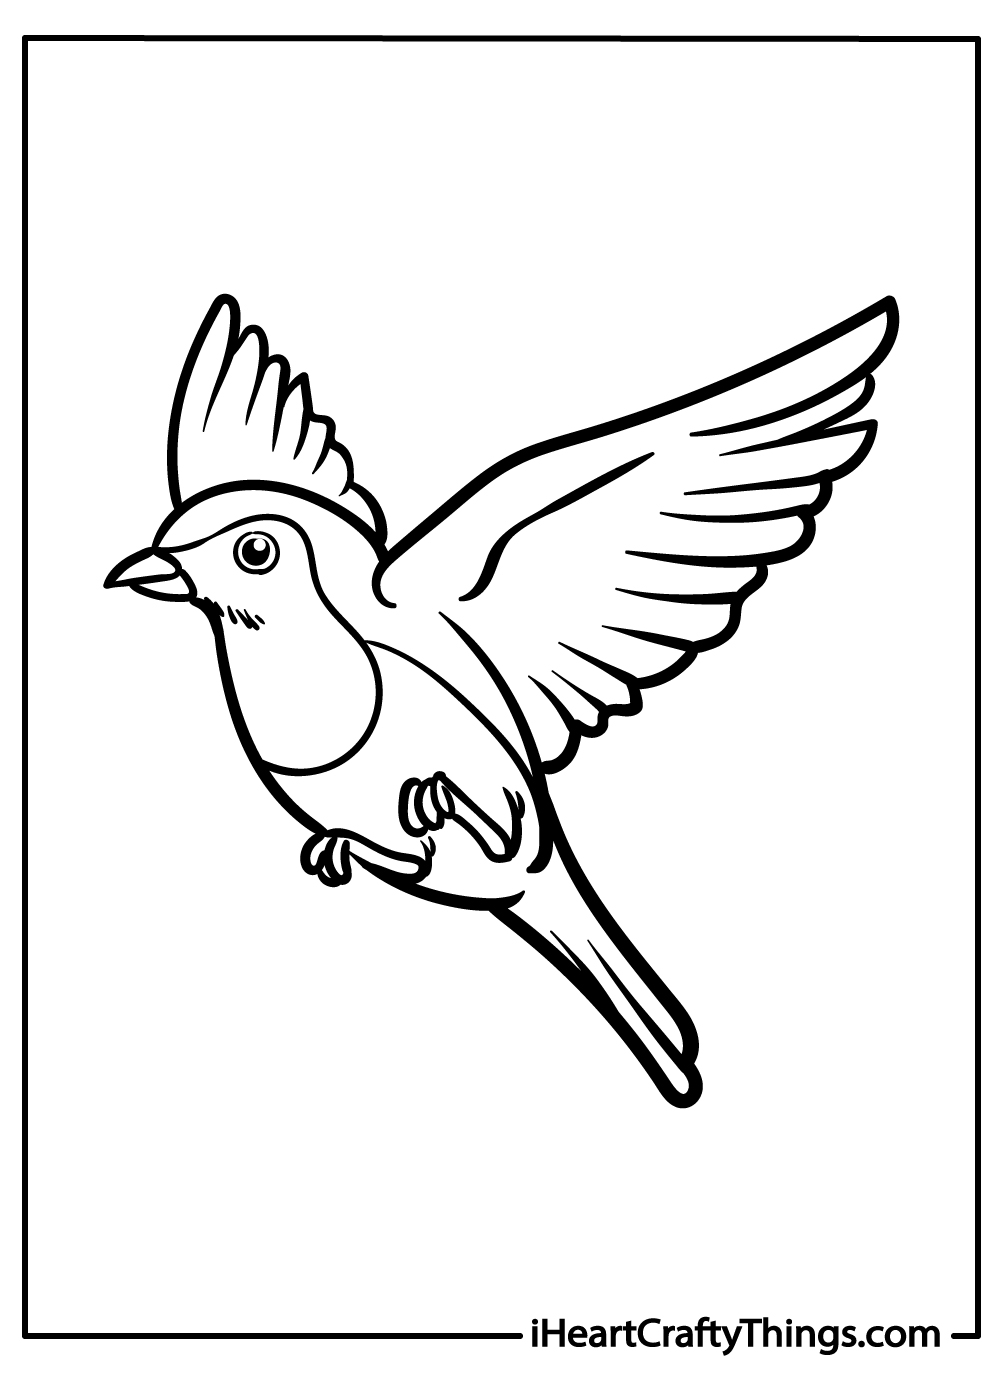 new robin coloring sheet free download